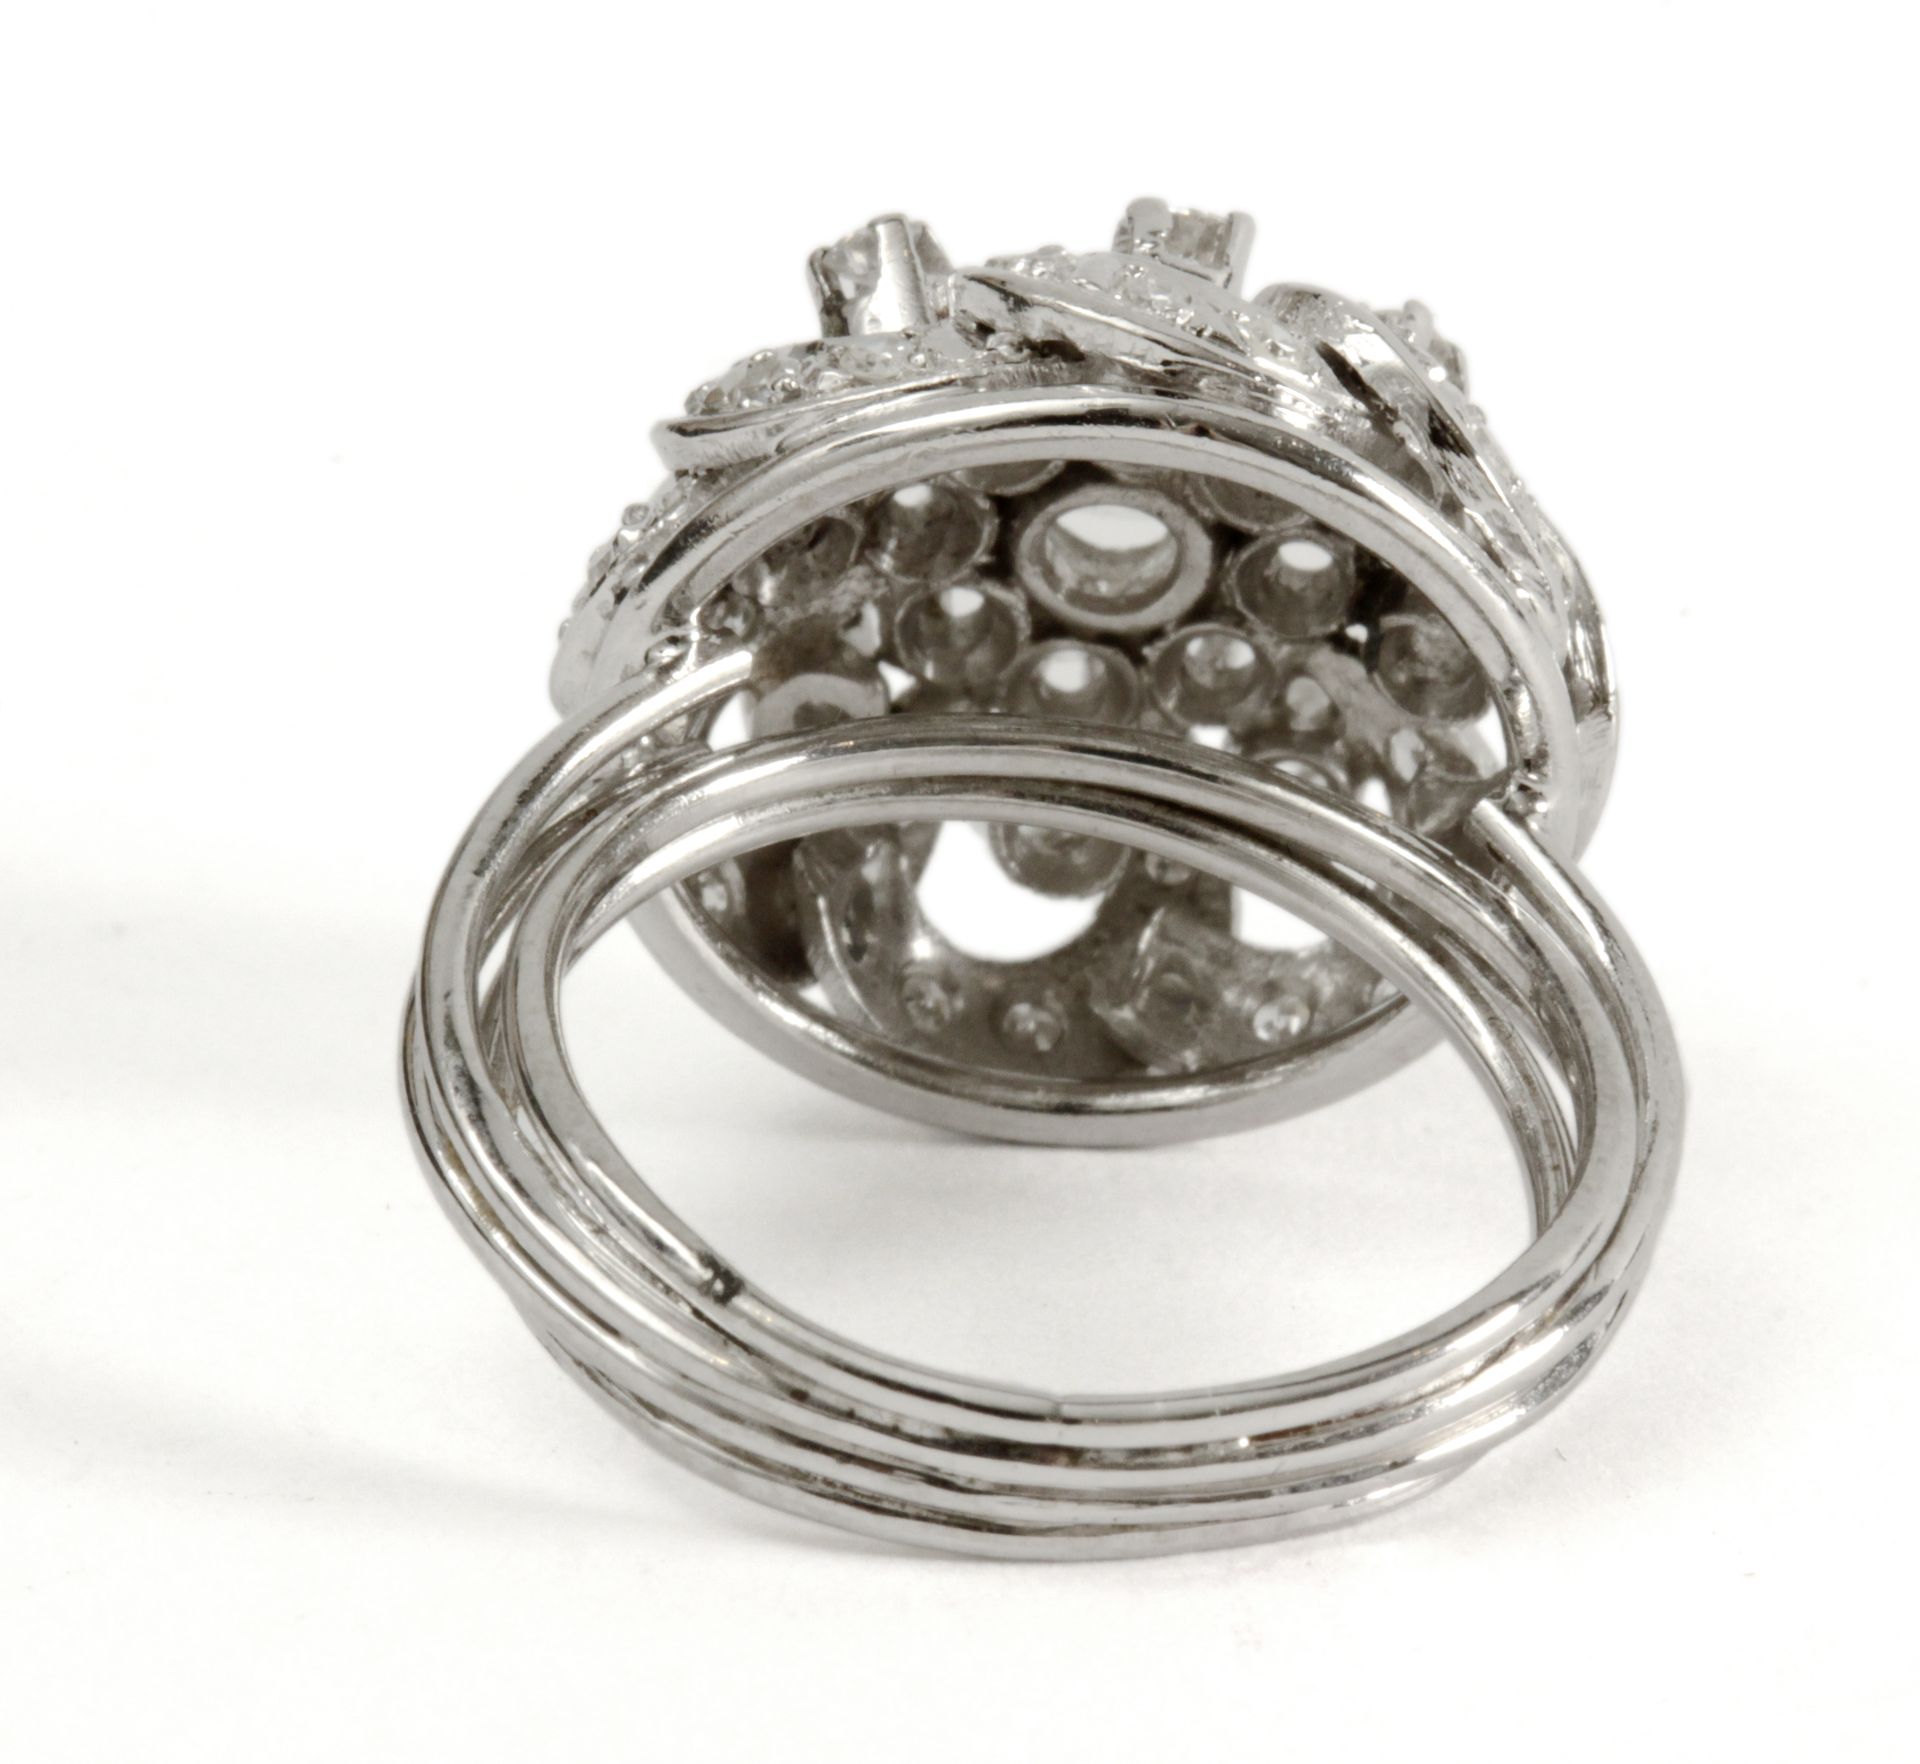 A brilliant cut diamonds bombe ring circa 1950 with a platinum setting - Image 3 of 3